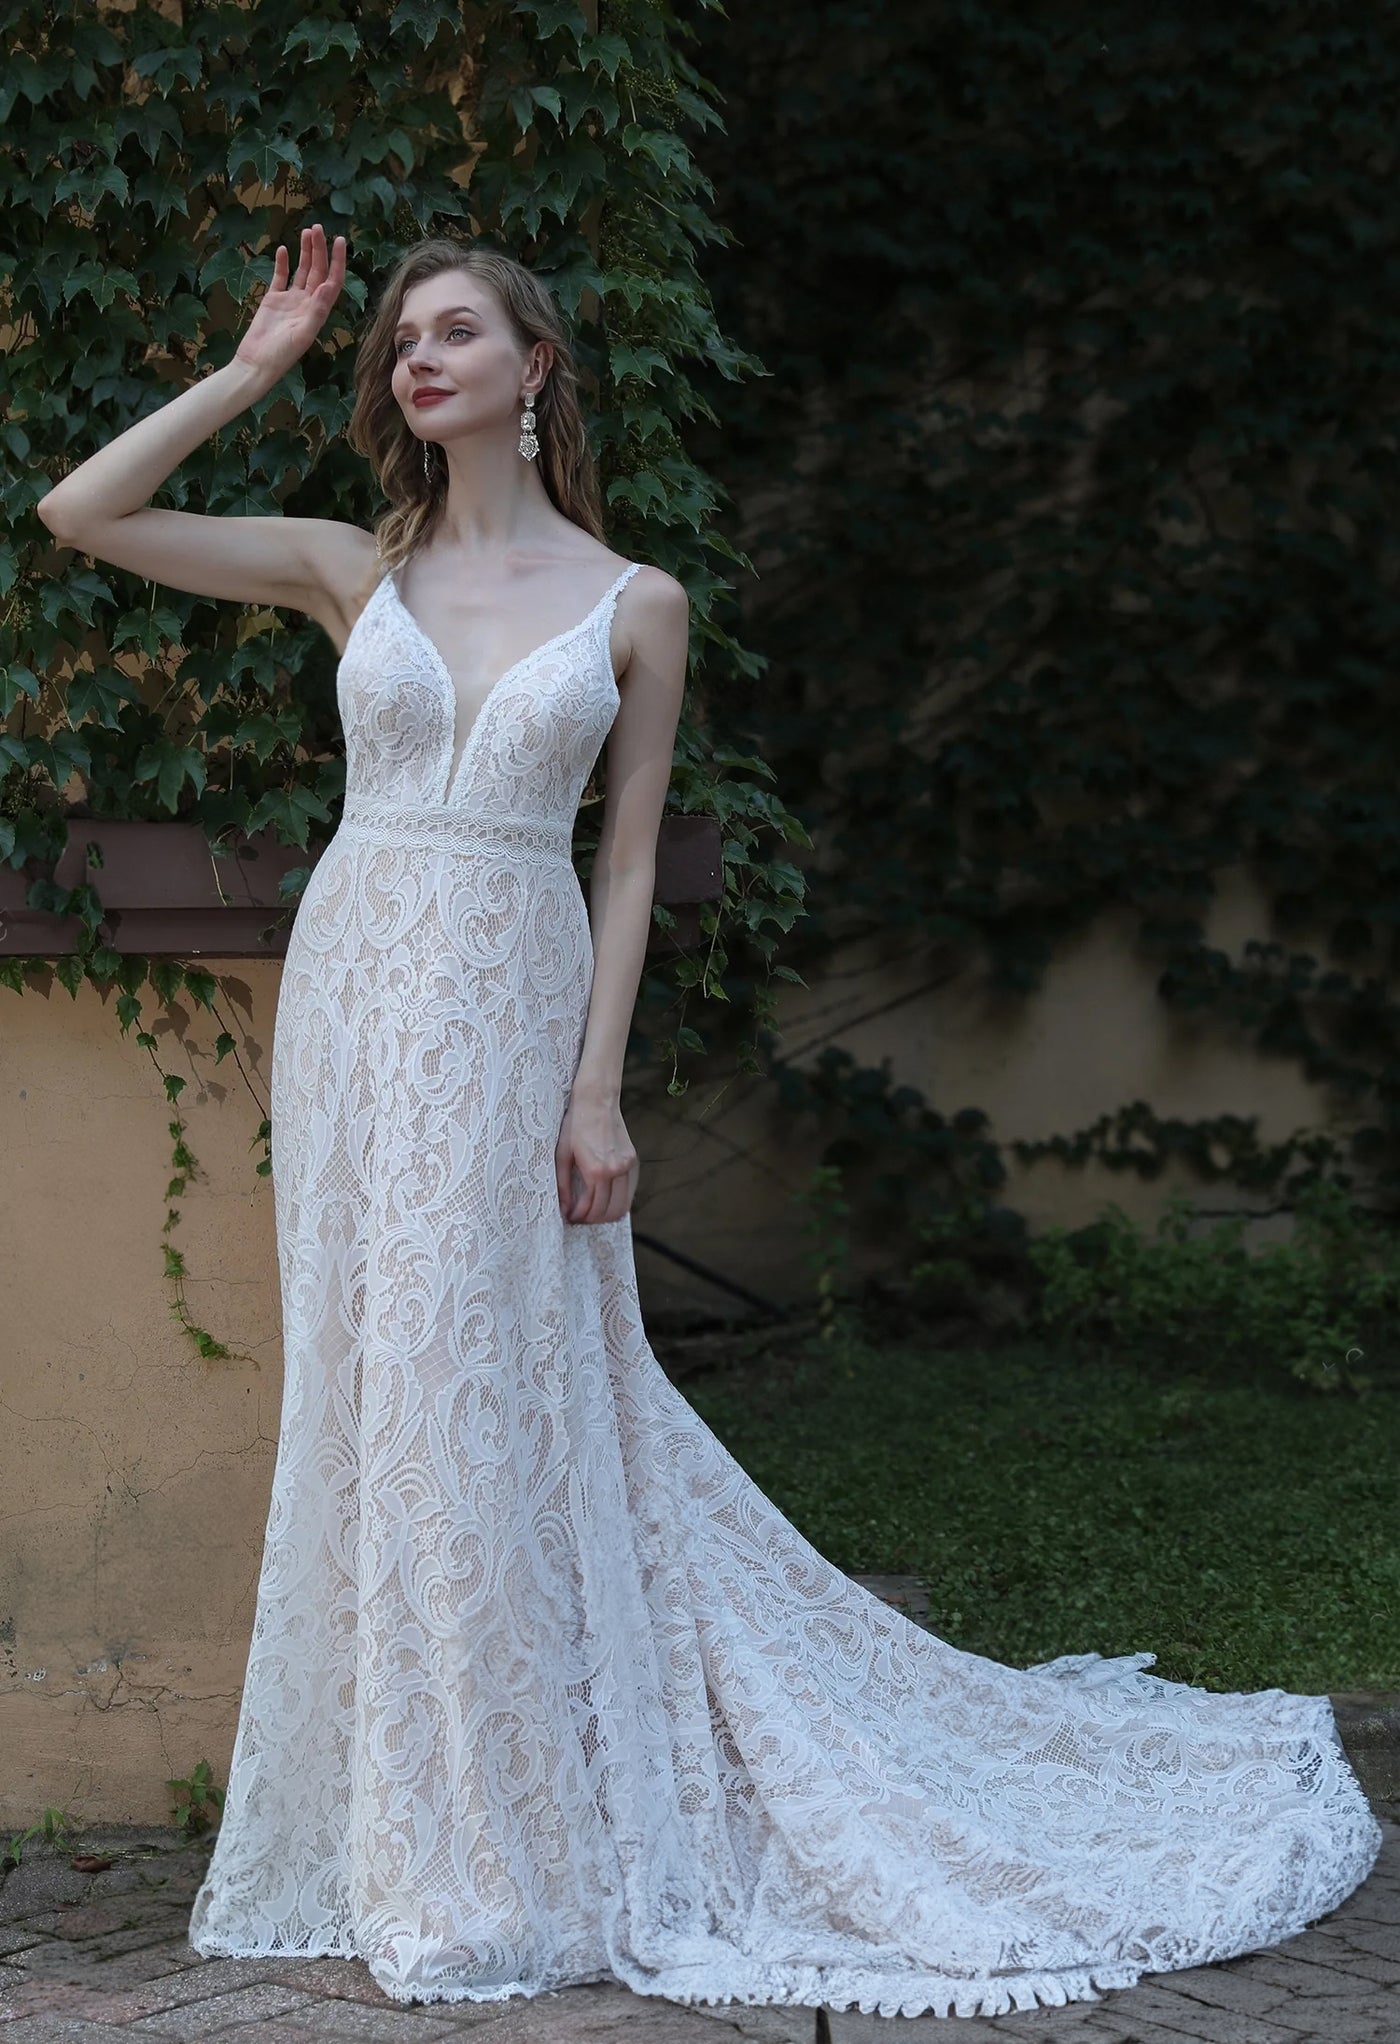 A bride wearing a Boho Lace Wedding Dress With Spaghetti Straps and Removable Bell Sleeves by Bergamot Bridal is posing in front of a brick wall.